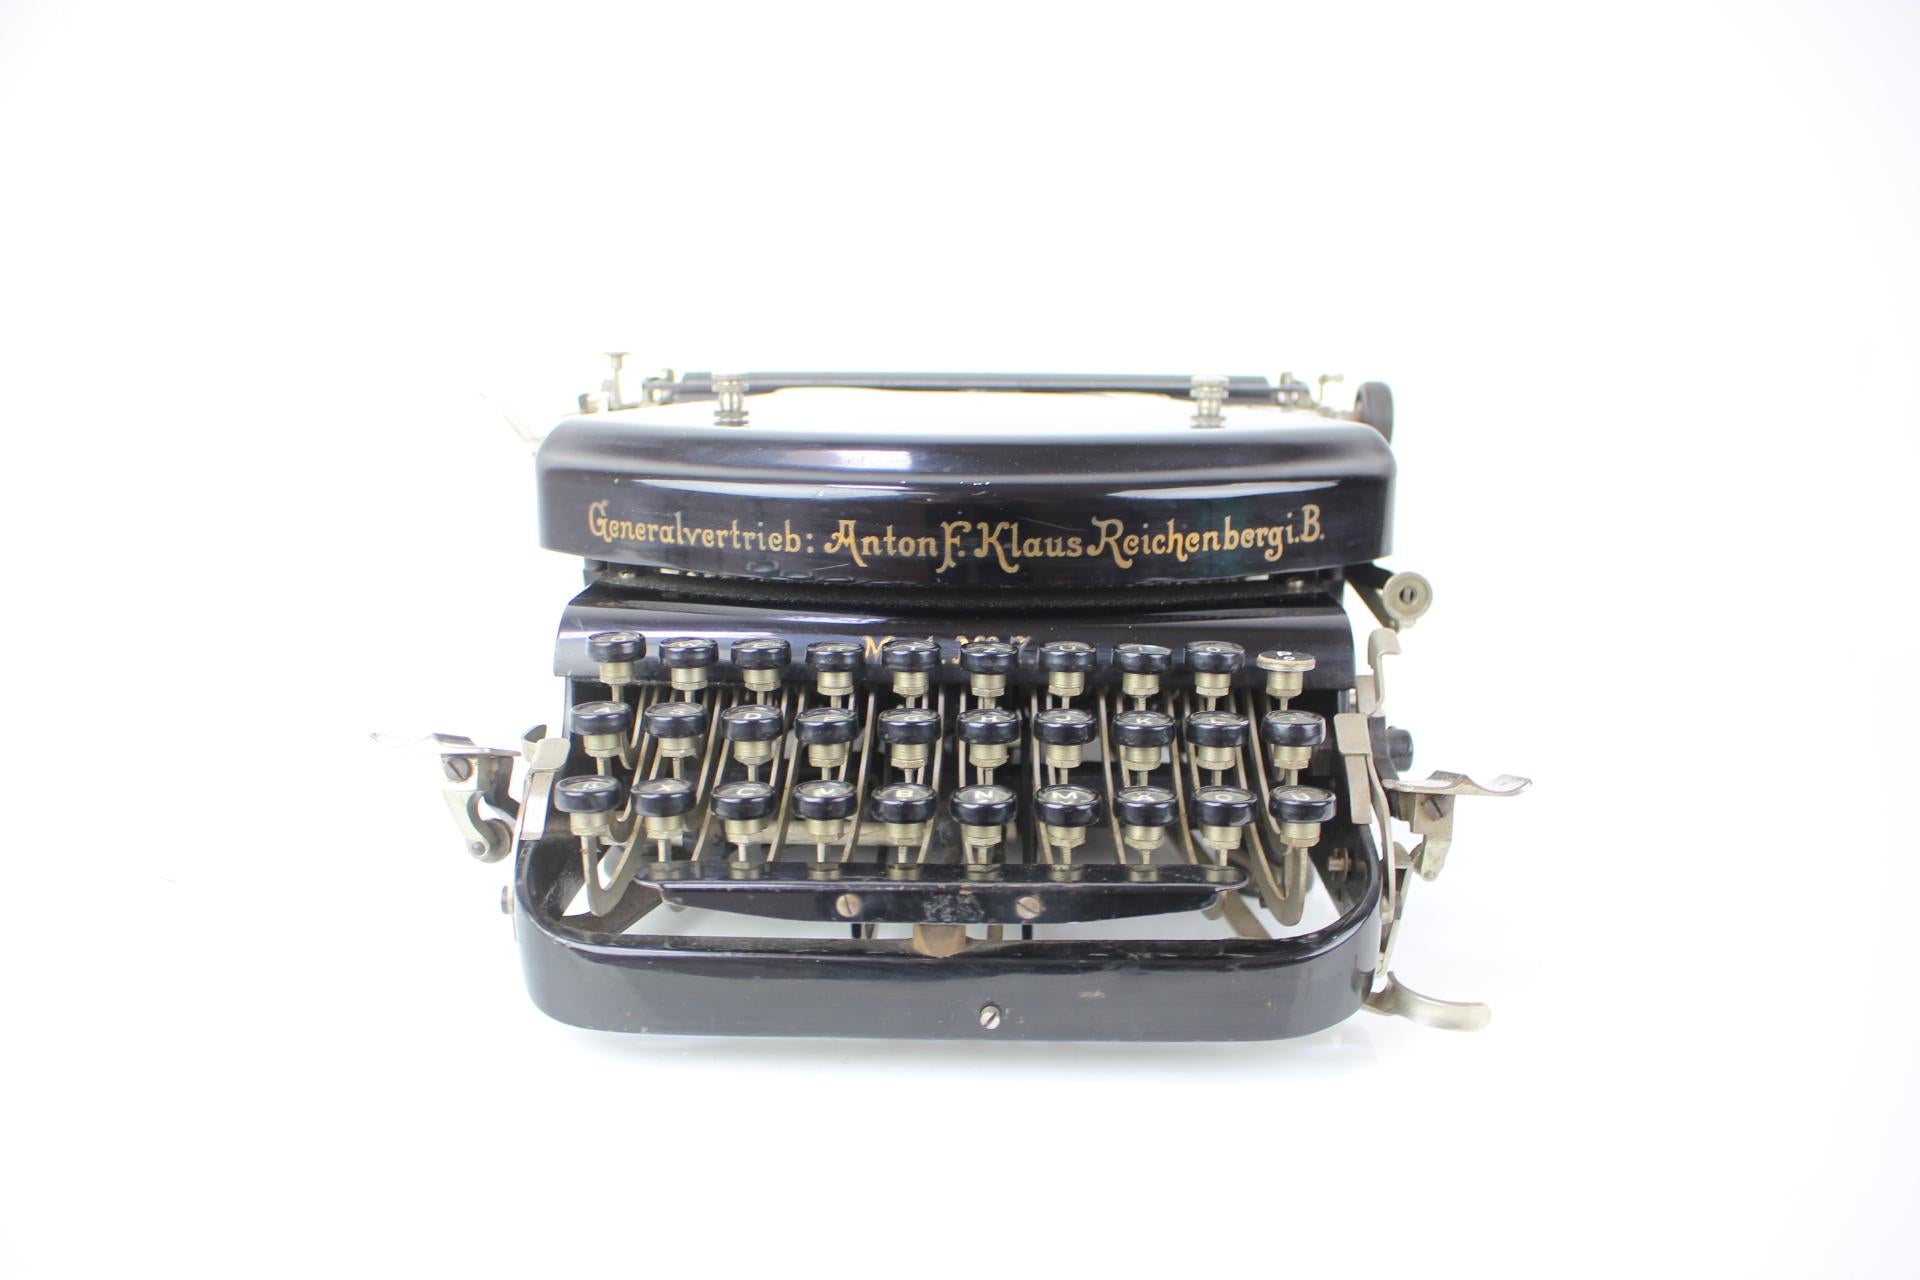 The first typewriter of German production - rare
Fully functional.
The packaging of the machine has surface defects that are associated with the age of use.
Made in Germany-number series:306029
Made of metal, steel, chrome, fabric
Polished
Good